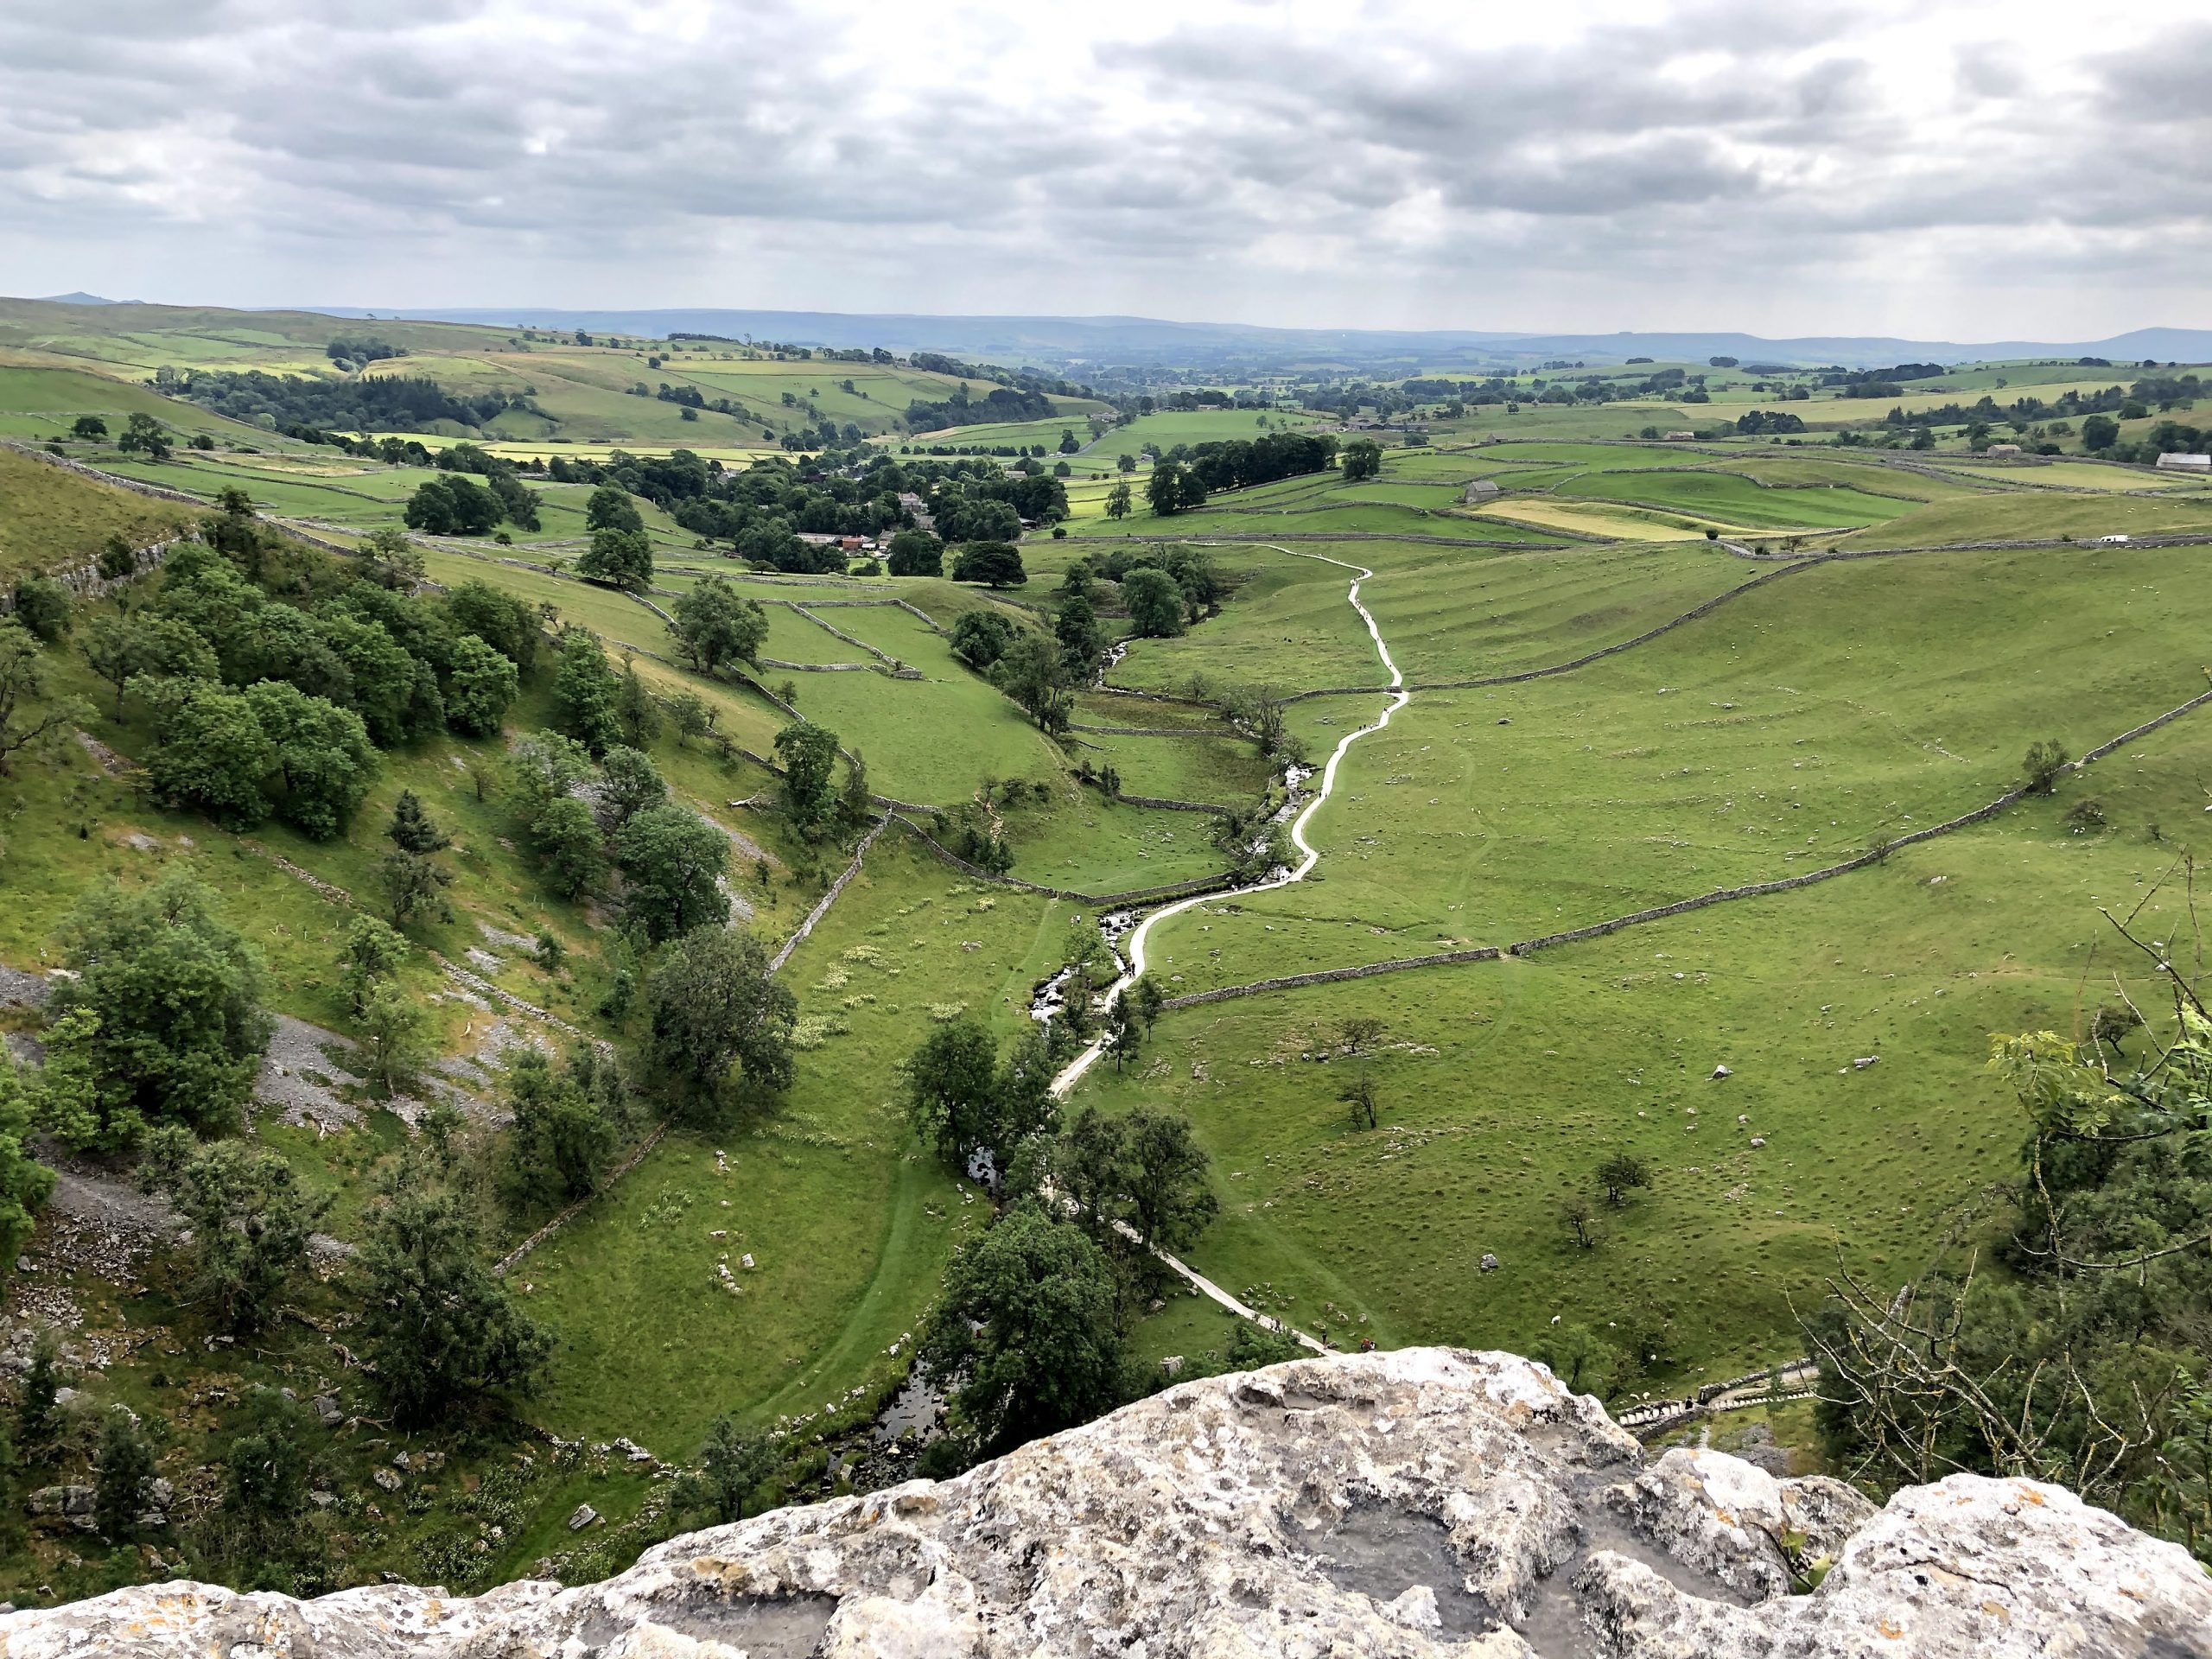 The view across the valley from Malham cove cliff